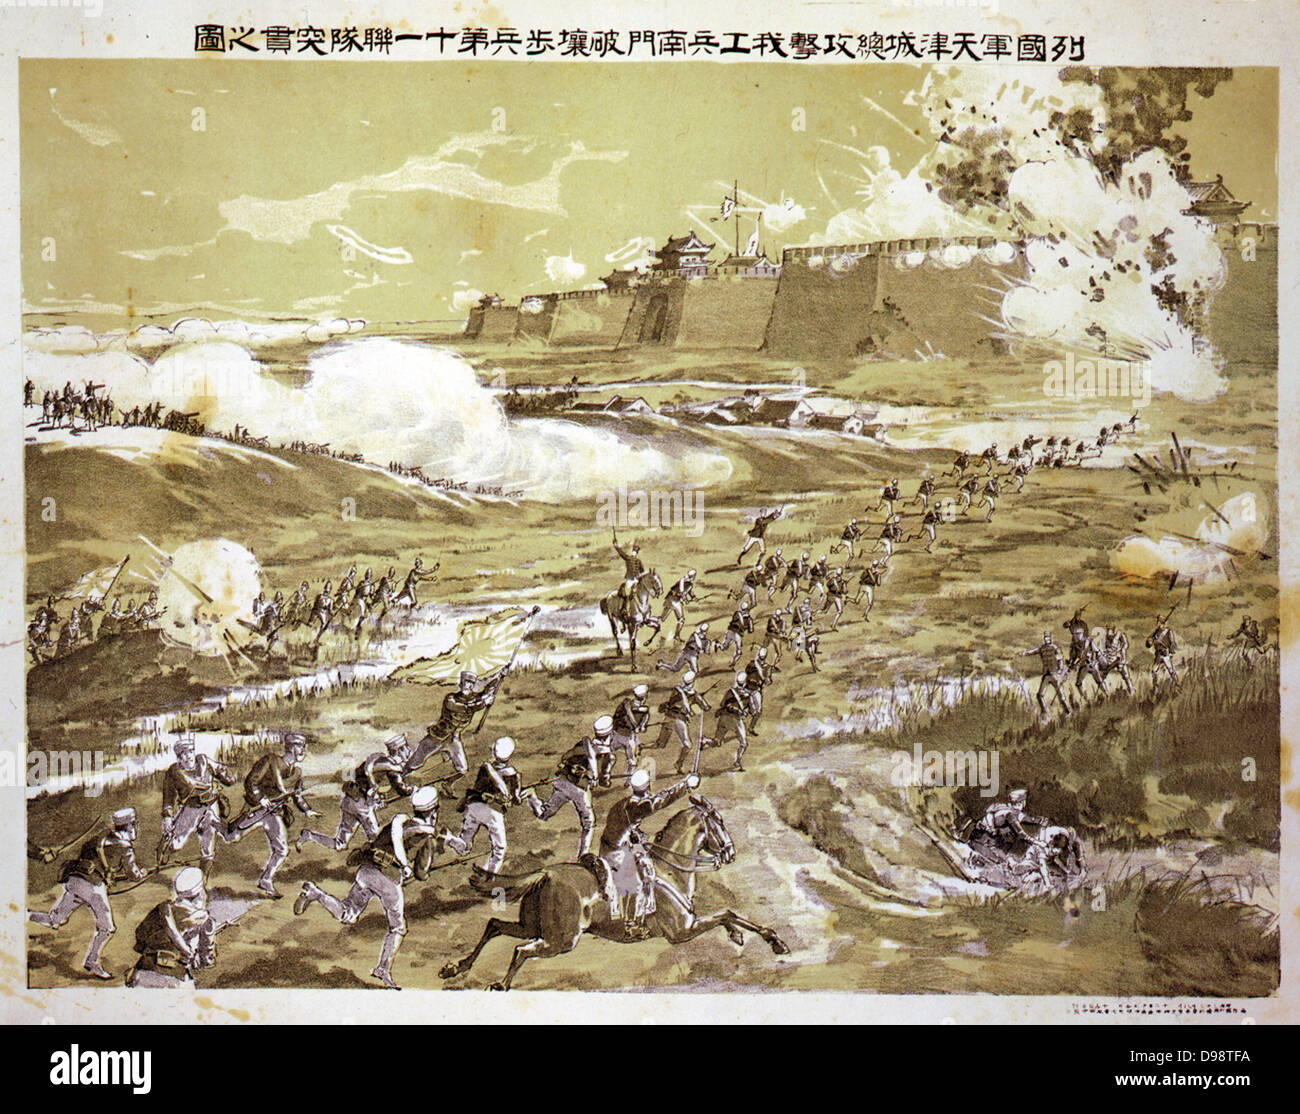 Boxer Rising, China, 1899-1901: Troops of the Eight-Nation Alliance under the command of Japanese Colonel Kuriya, attacking Tianjin (Tientsin), 14 July 1900. Bombardment Explosion Infantry Field Gun Fortress Stock Photo